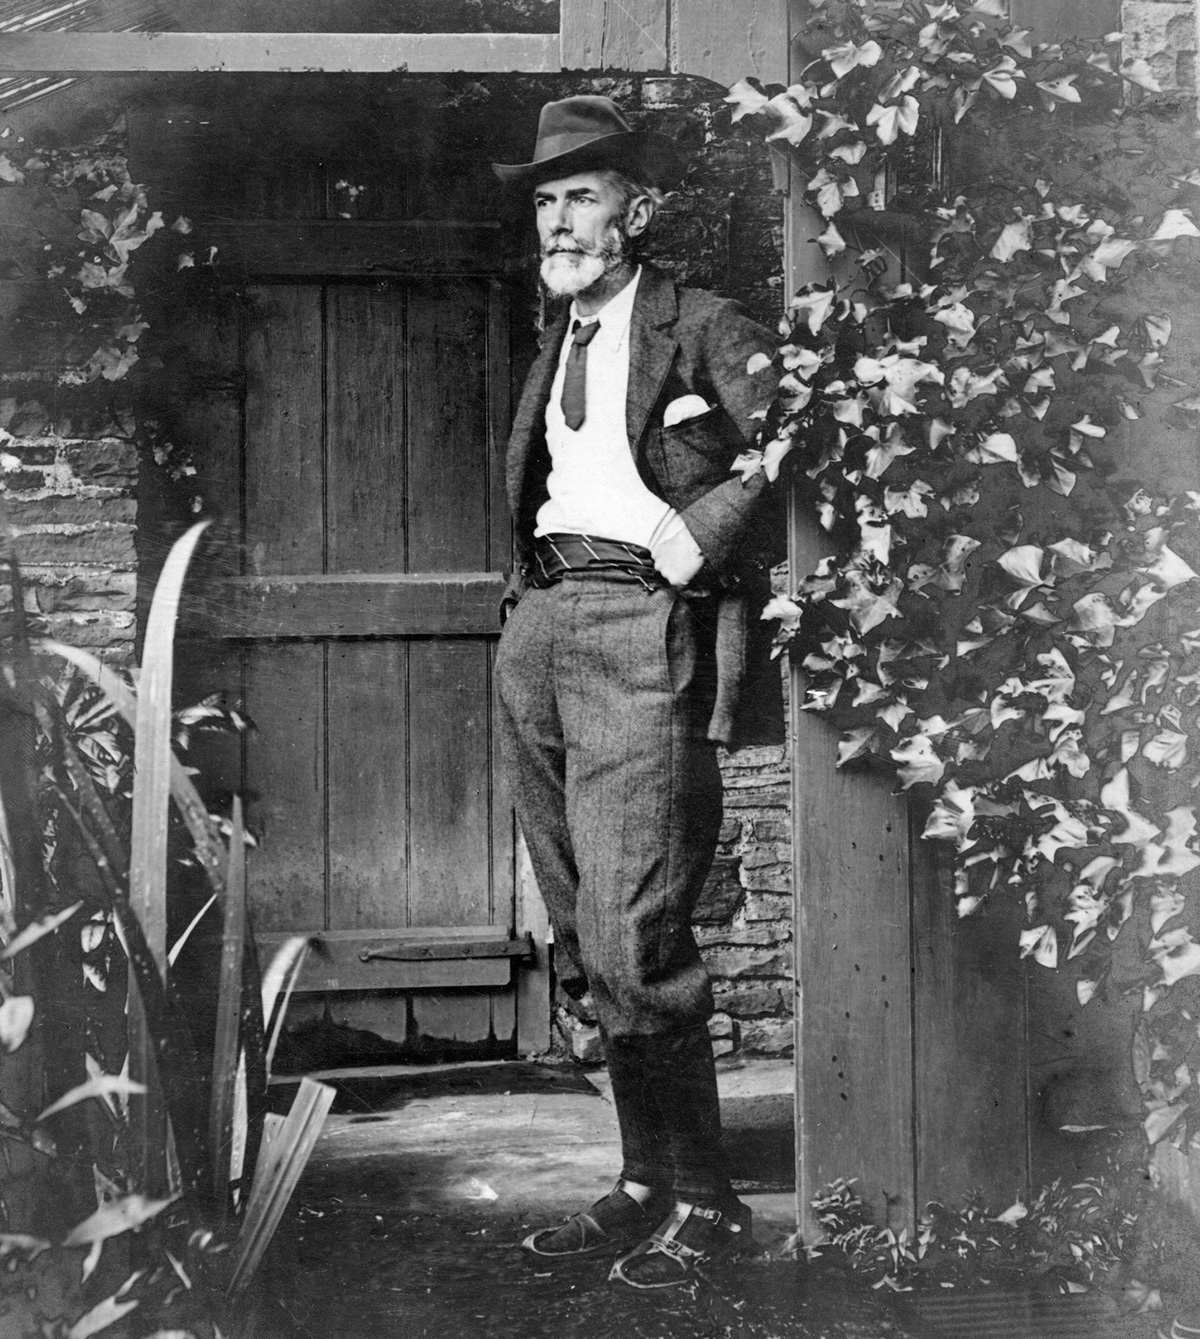 Edward Carpenter standing outside his cottage in Millthorpe, Derbyshire, 1905. He is wearing a pair of his famous Indian-style sandals, which he made himself, and a jacket, knickerbockers, cravat, and cummerbund of his own design. Courtesy Sheffield Archives, Carpenter Collection, Box 8/31a.